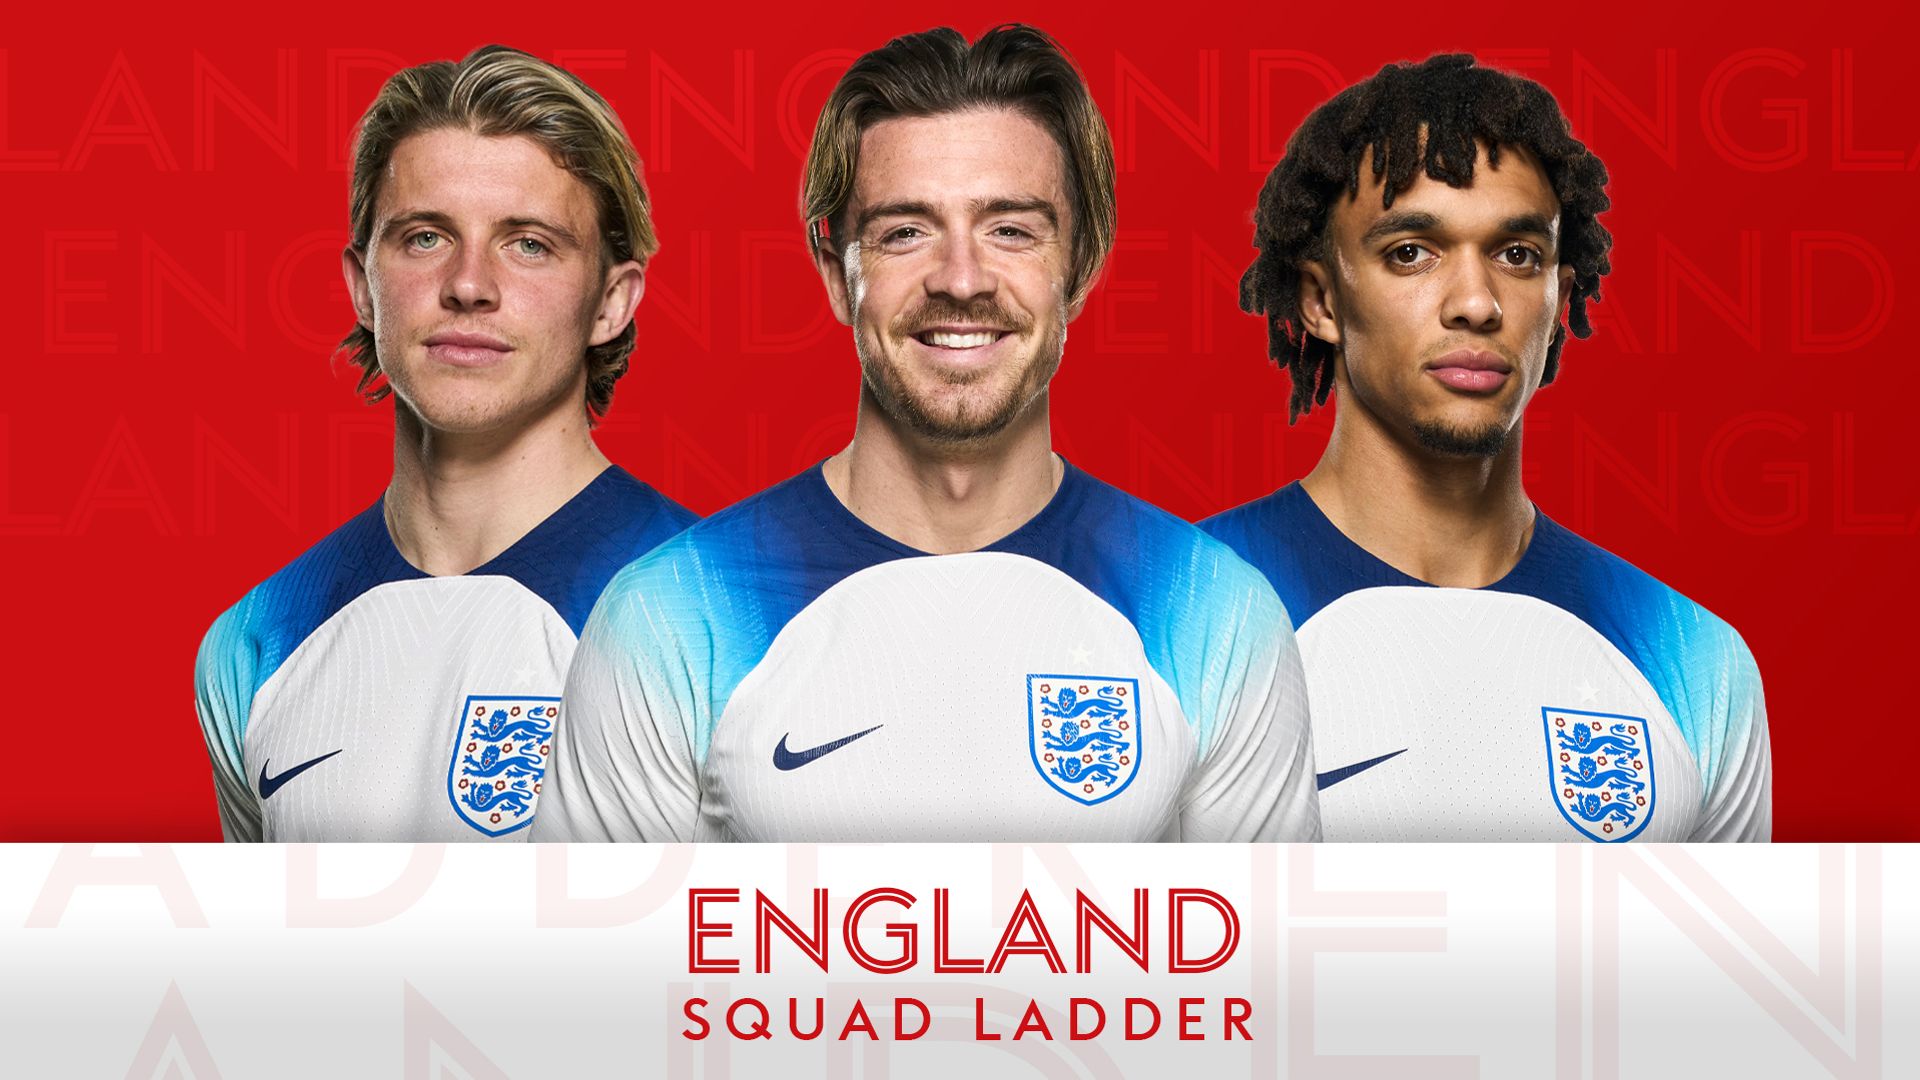 England World Cup squad ladder: Grealish on the plane, Wilson rising, TAA sliding